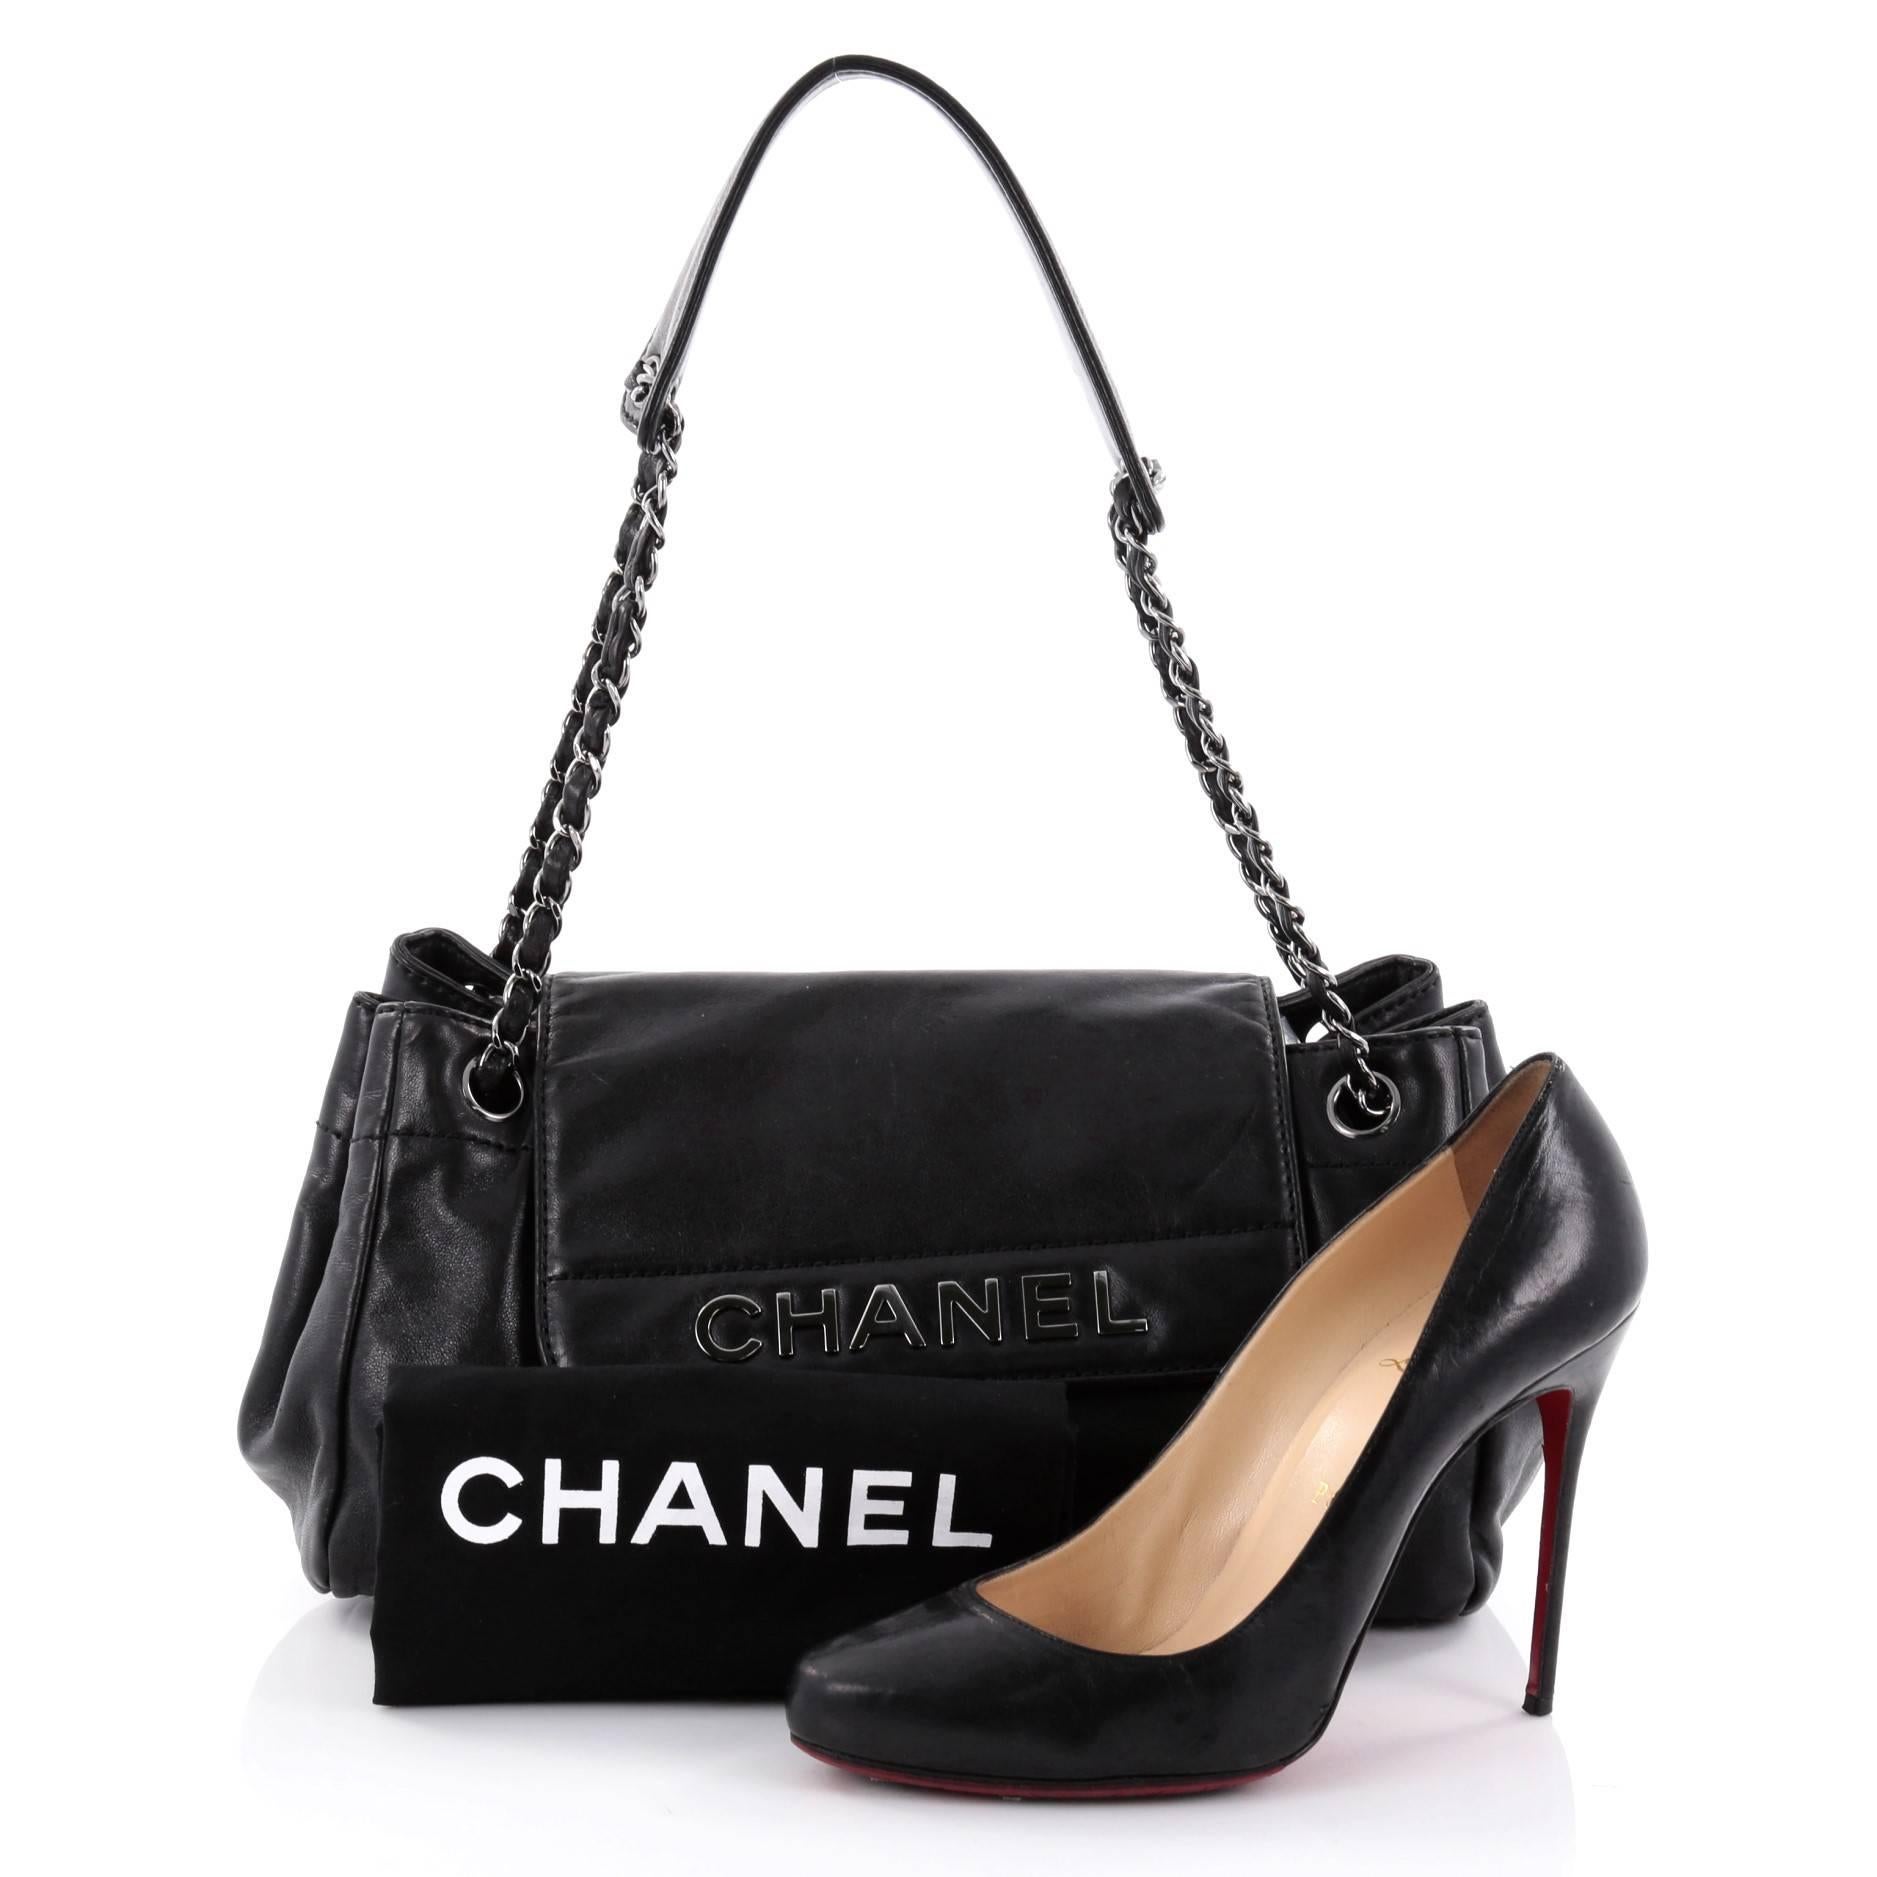 This authentic Chanel Lax Accordion Flap Bag Leather Medium is ideal for everyday escapades. Crafted from black leather, this gorgeous shoulder bag features woven-in leather chain straps with leather pad that cinches the exterior side pockets,